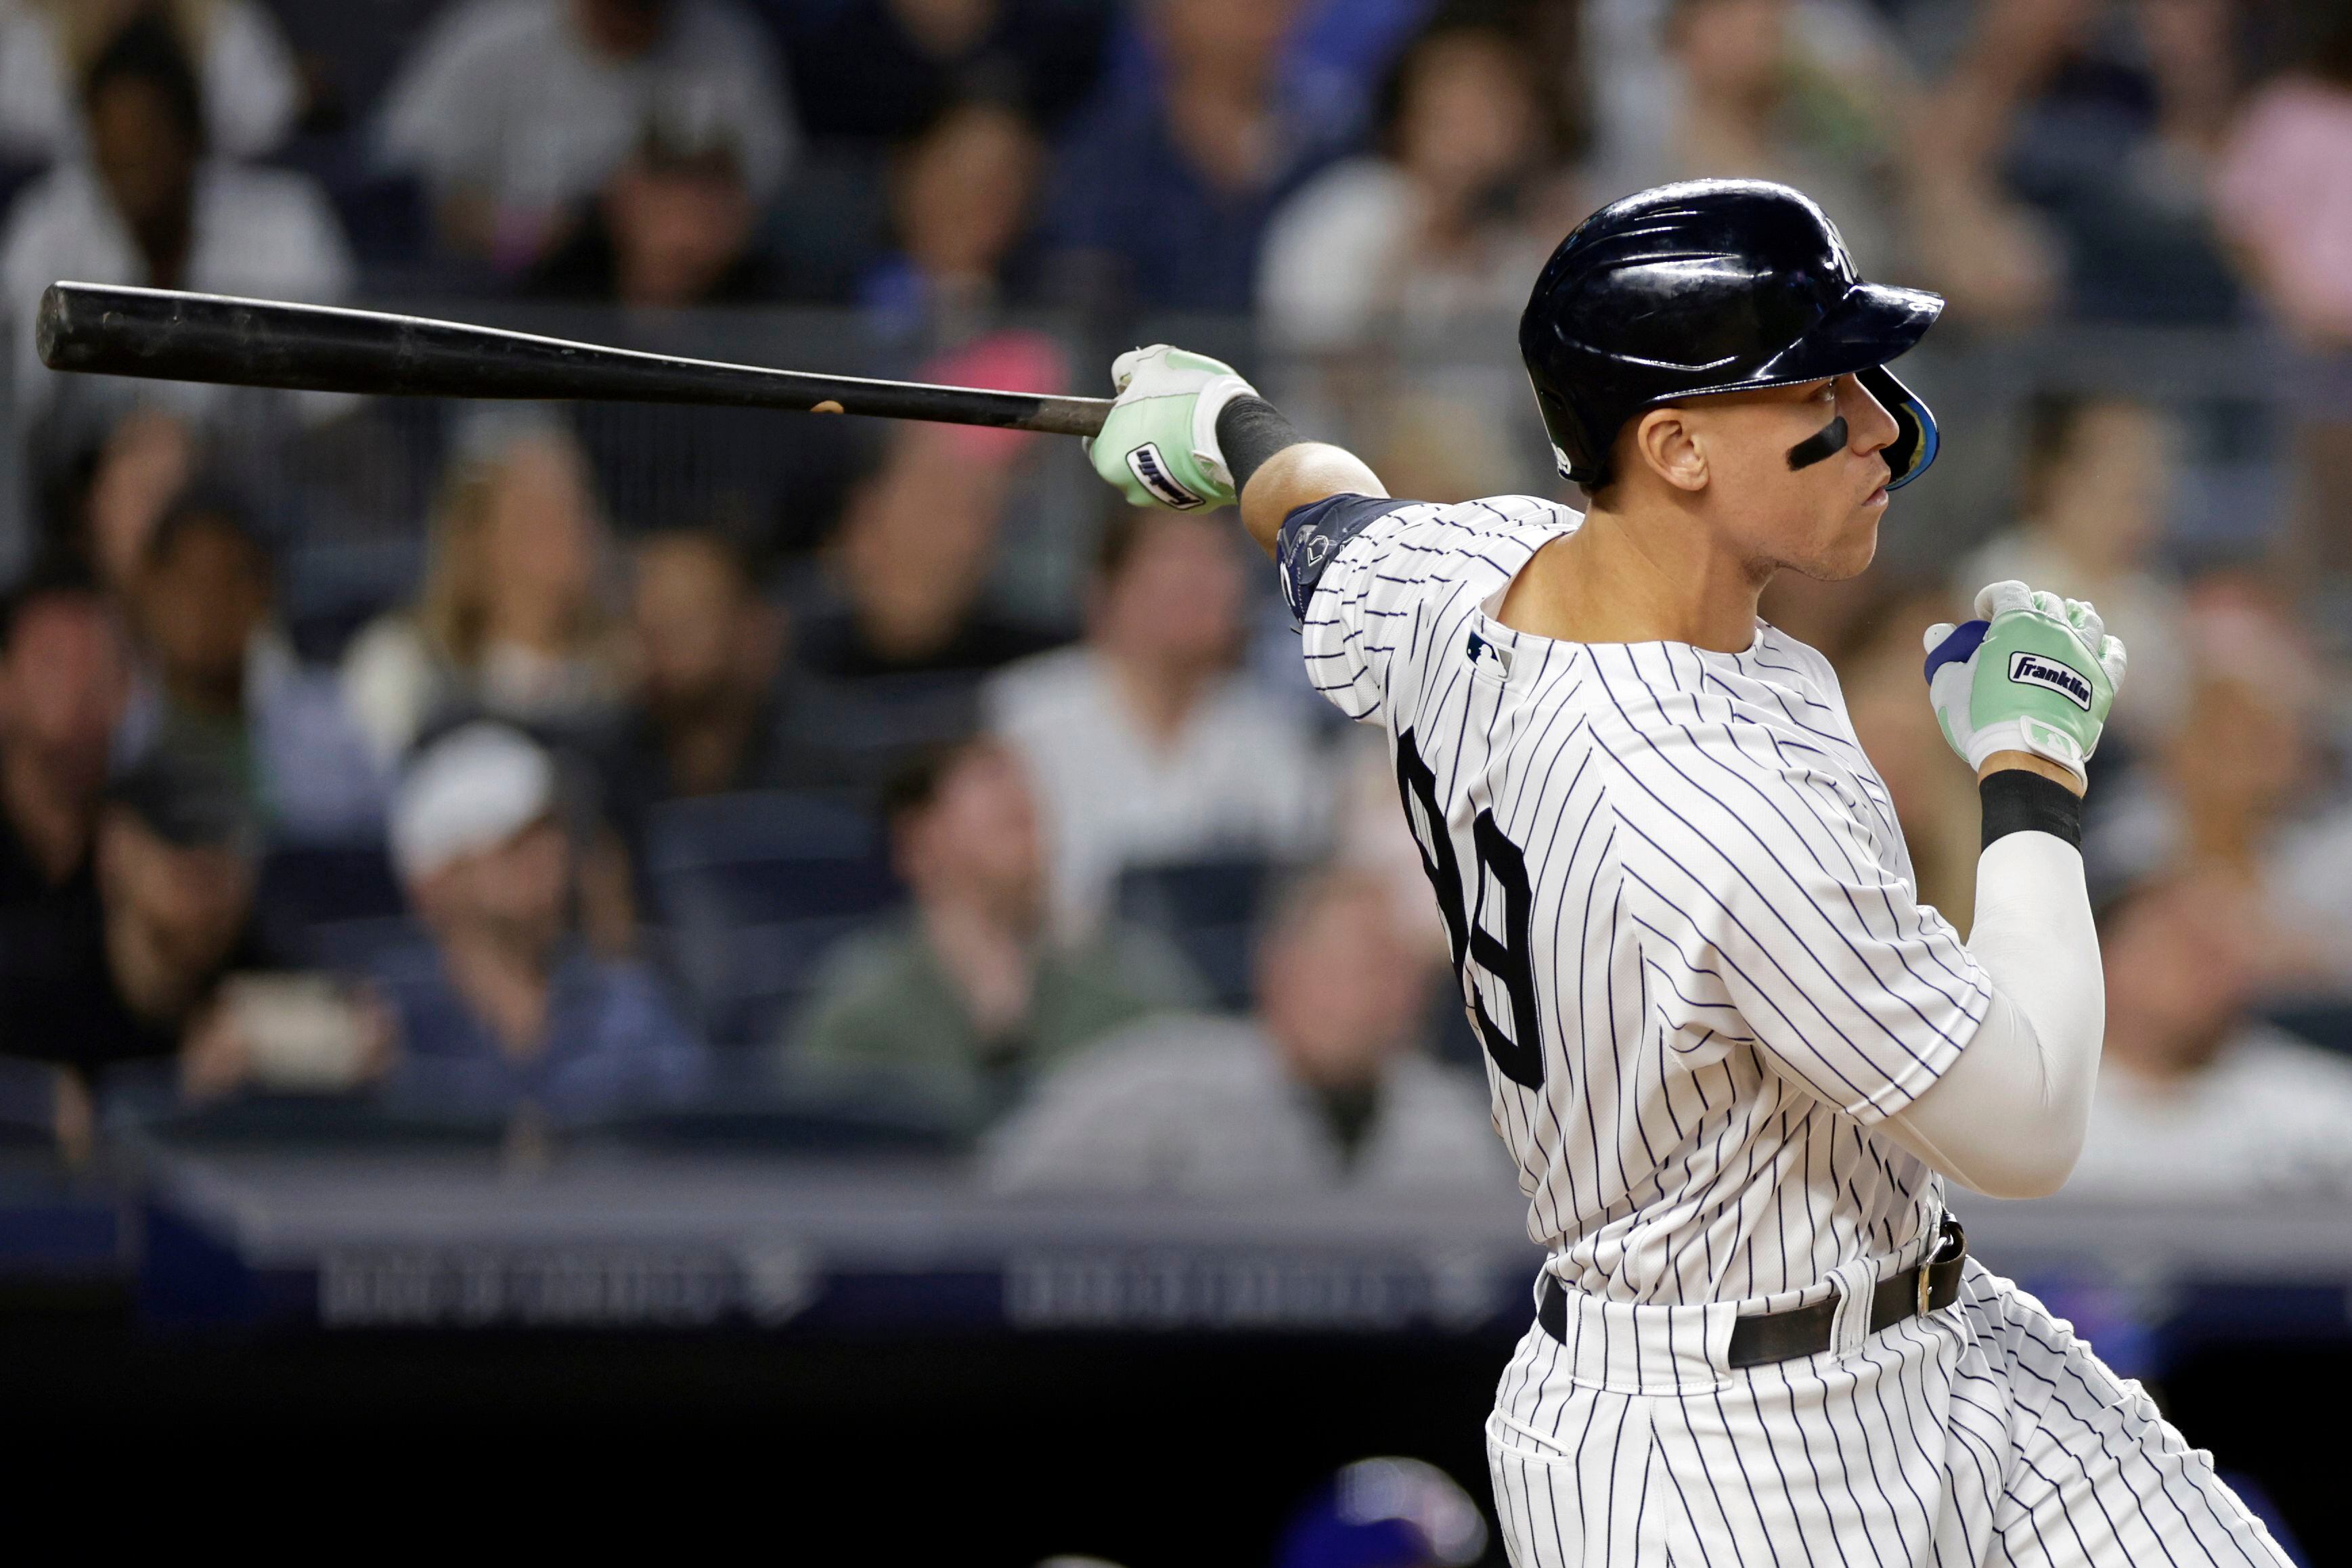 Yankees' Stanton goes on 10-day IL with Achilles tendinitis